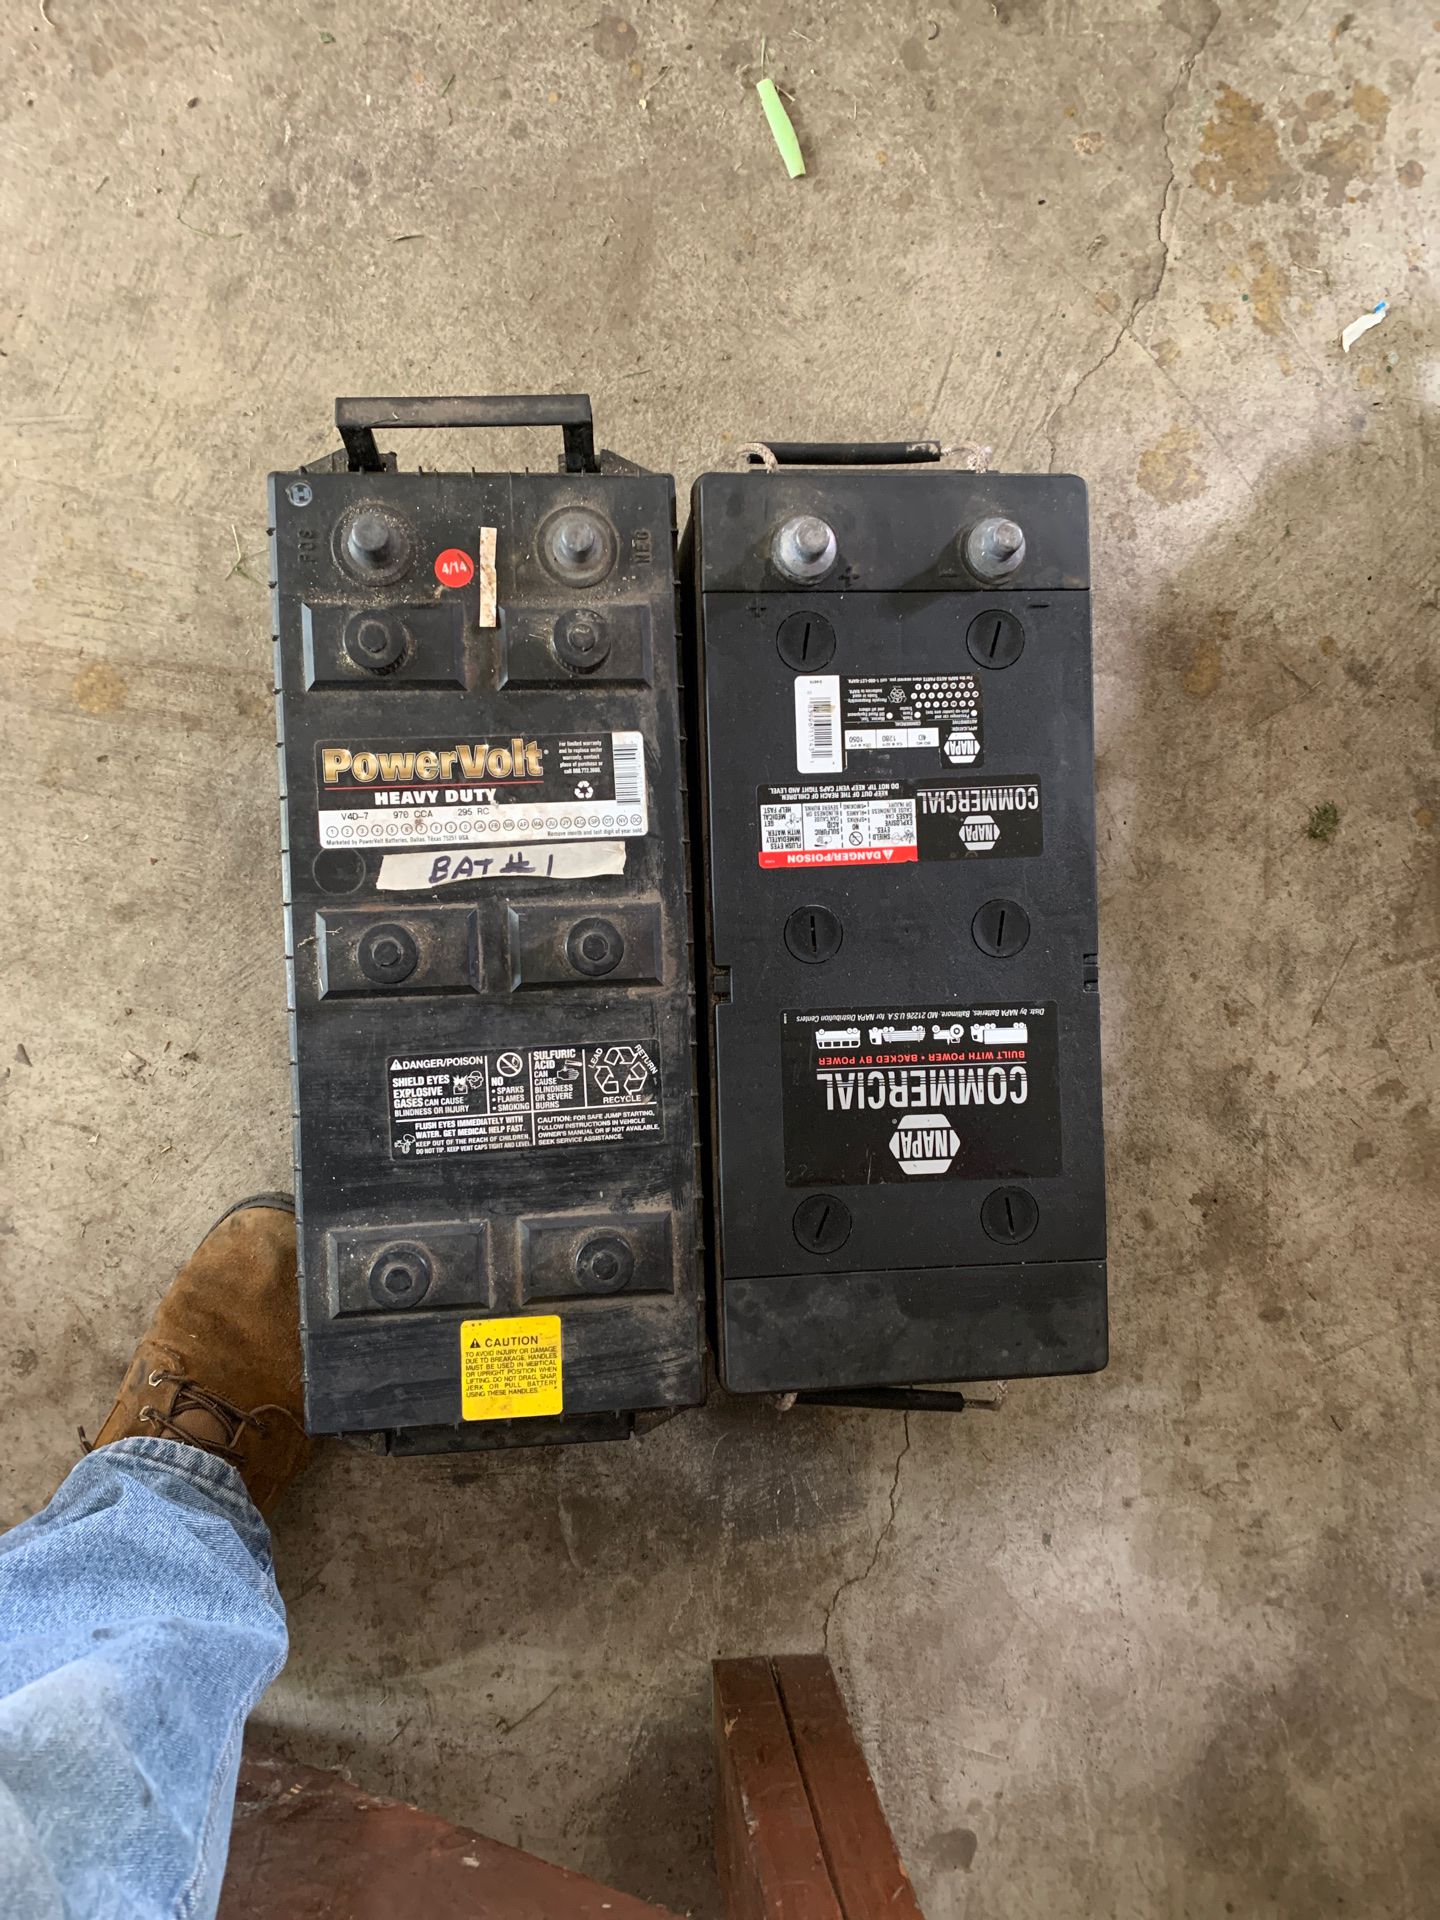 Boat battery’s and gas can